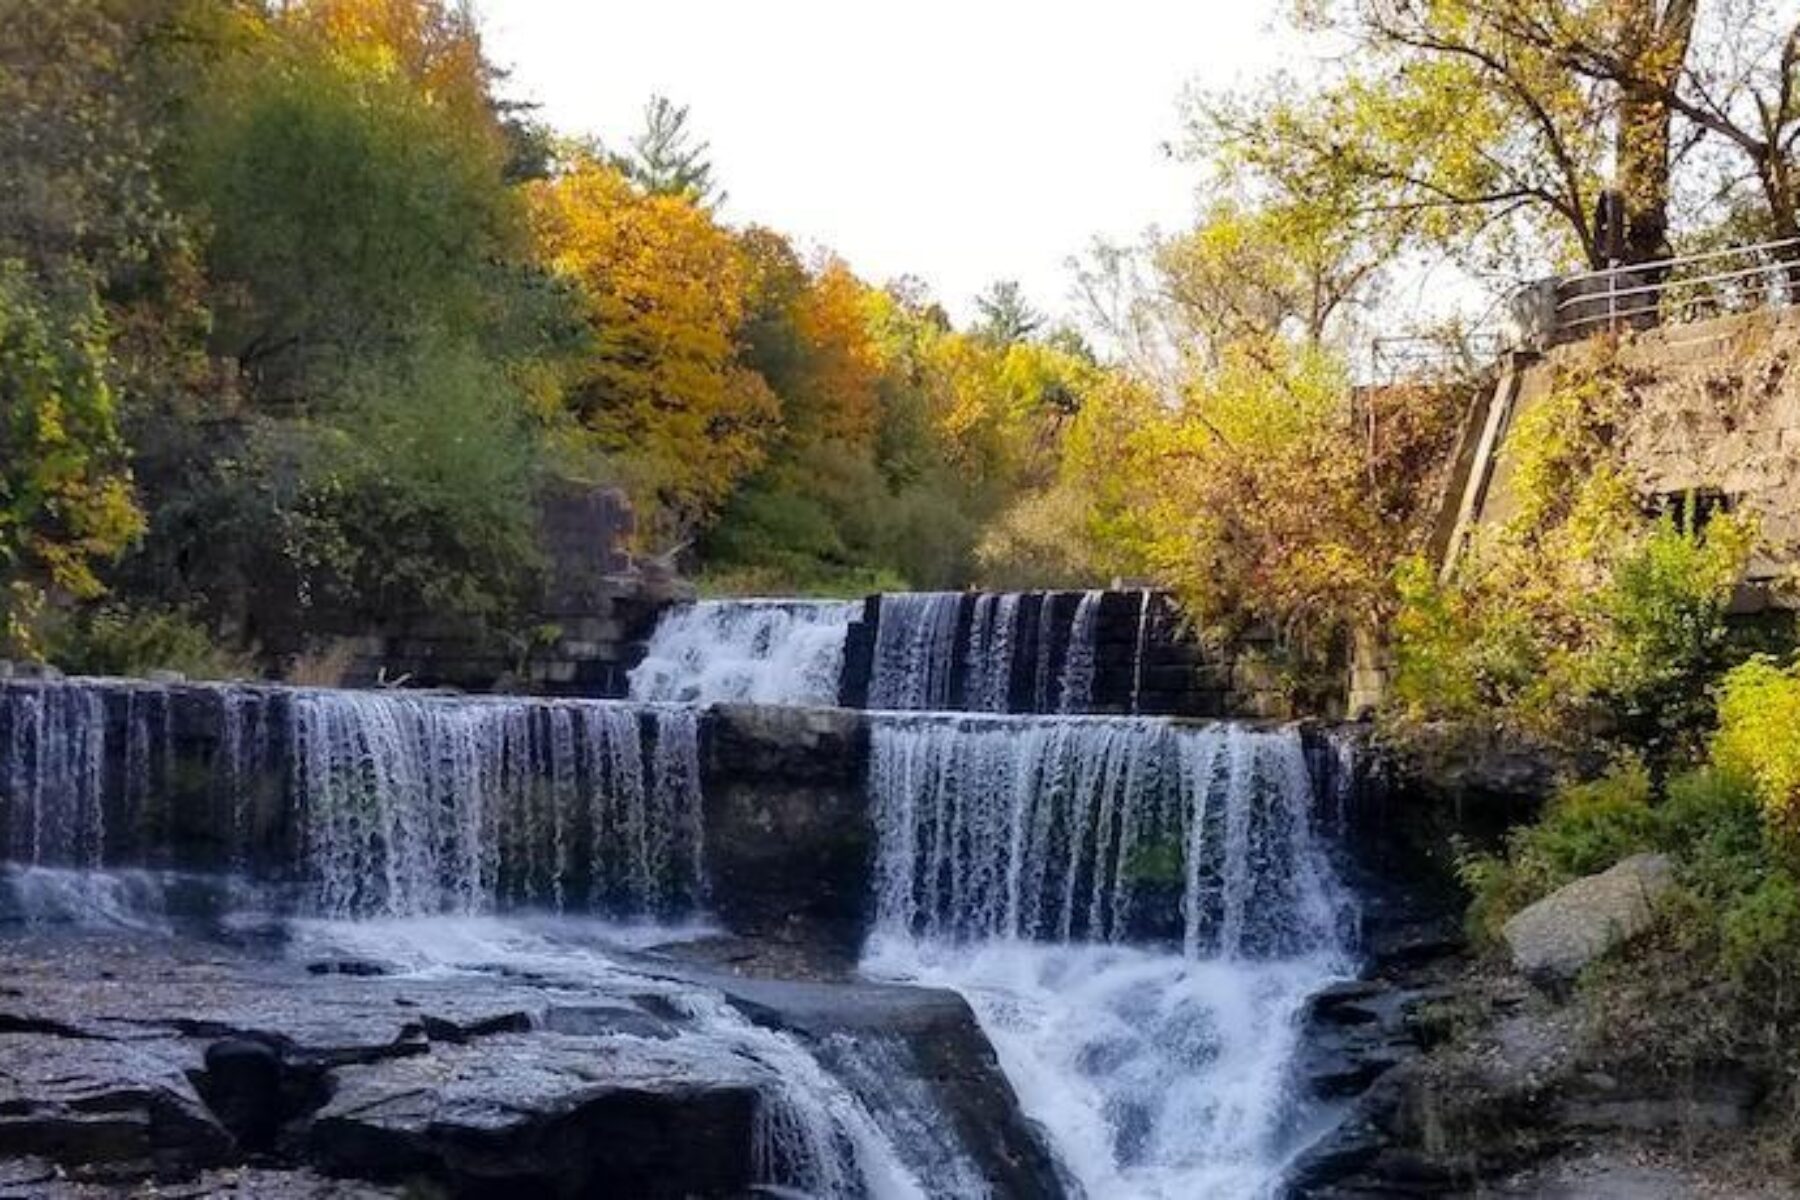 New York's Keuka Outlet Trail | Photo by TrailLink user leppfan_99